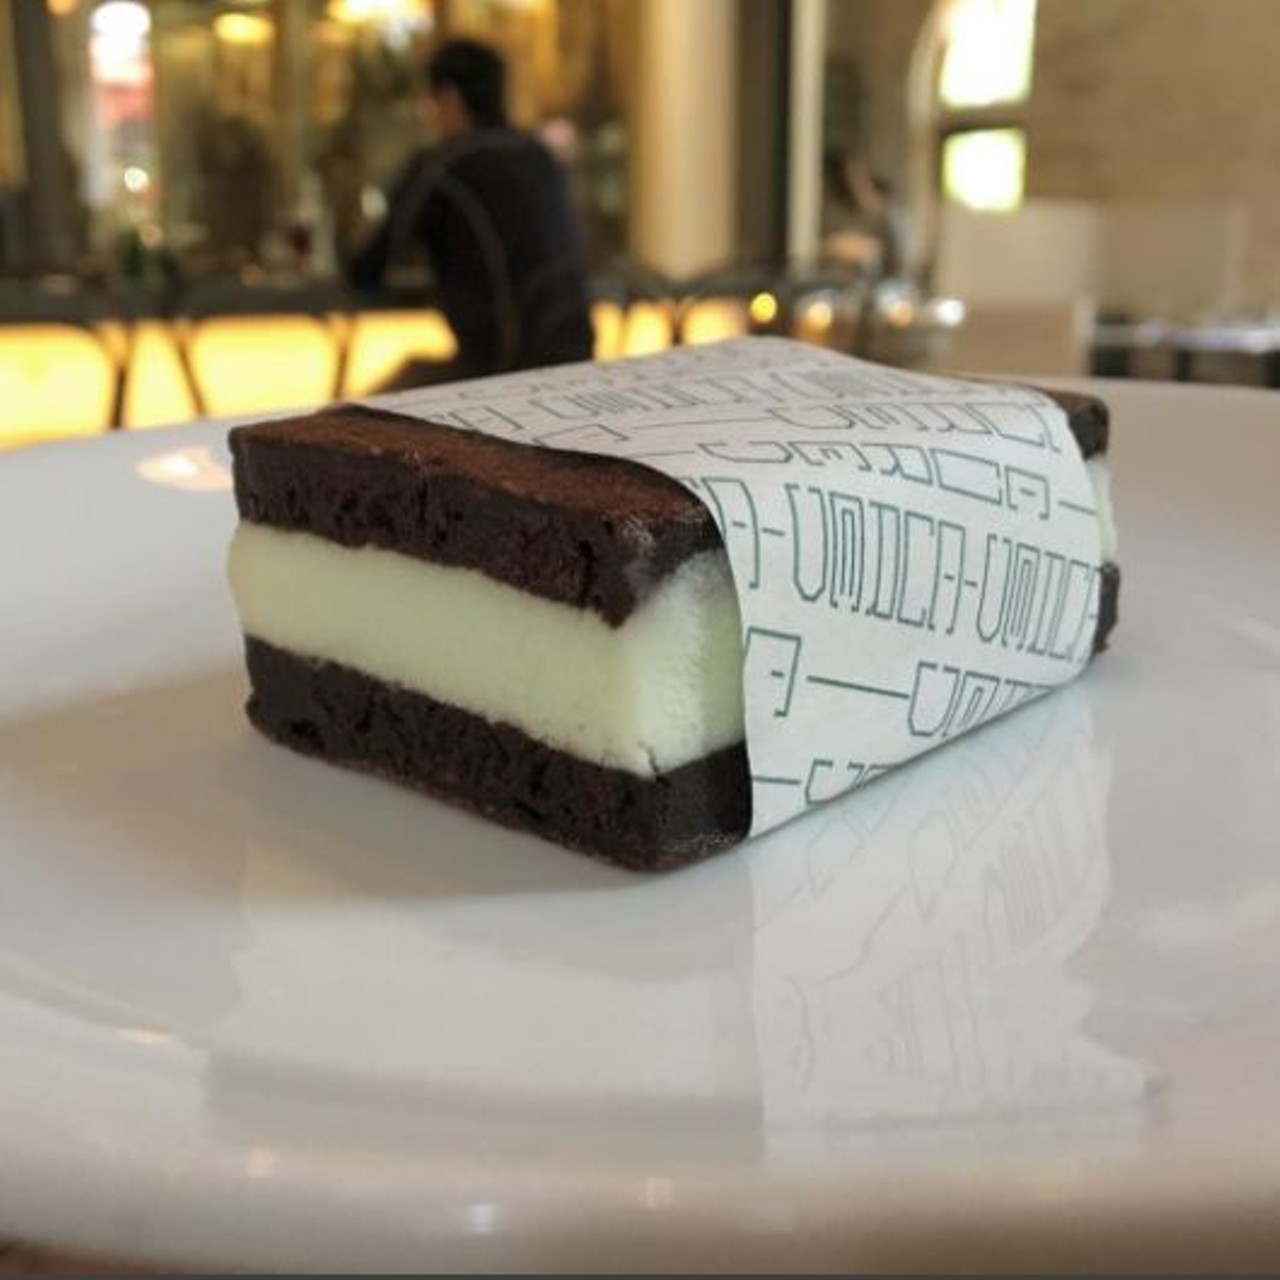 Ice Cream Sandwich from Cured
306 Pearl Pkwy #101, (210) 314-3929
Available only for lunch, the ice cream sandwiches are a cute, and relatively inexpensive way to satiate that sweet tooth. 
Photo via Instagram, jesselizarraras